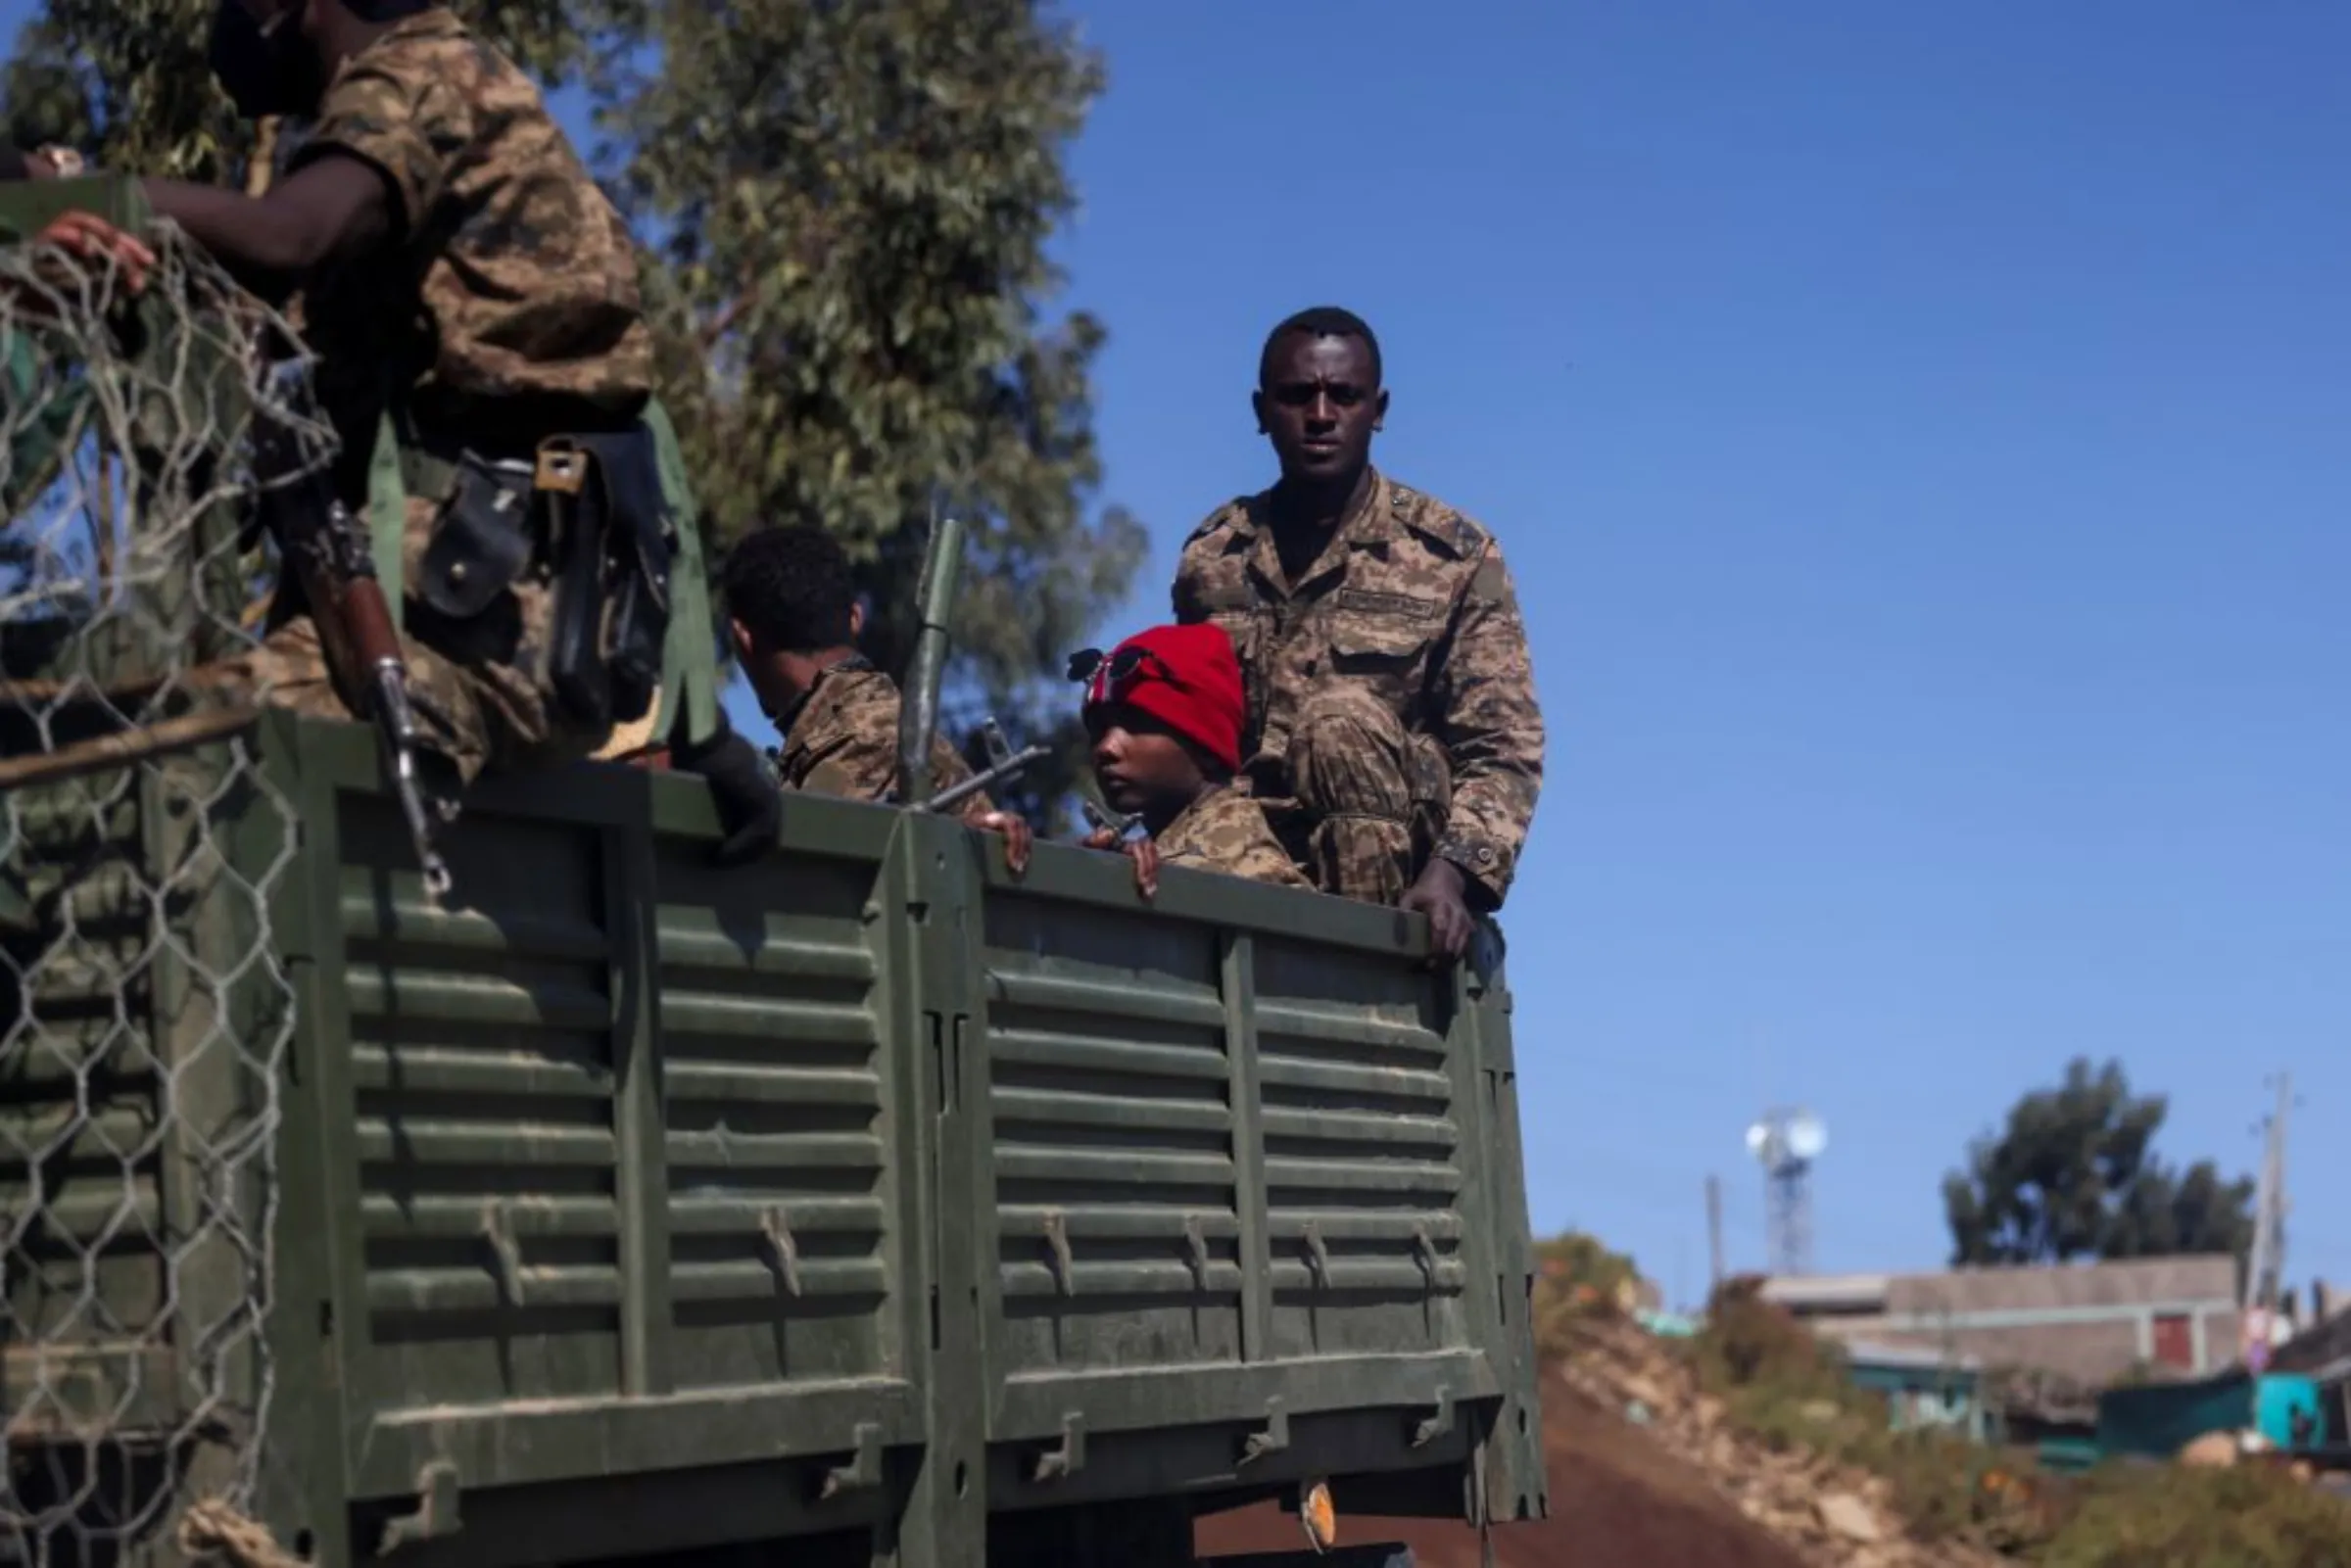 Ethiopian soldiers ride on a truck near the town of Adigrat, Tigray region, Ethiopia, March 18, 2021